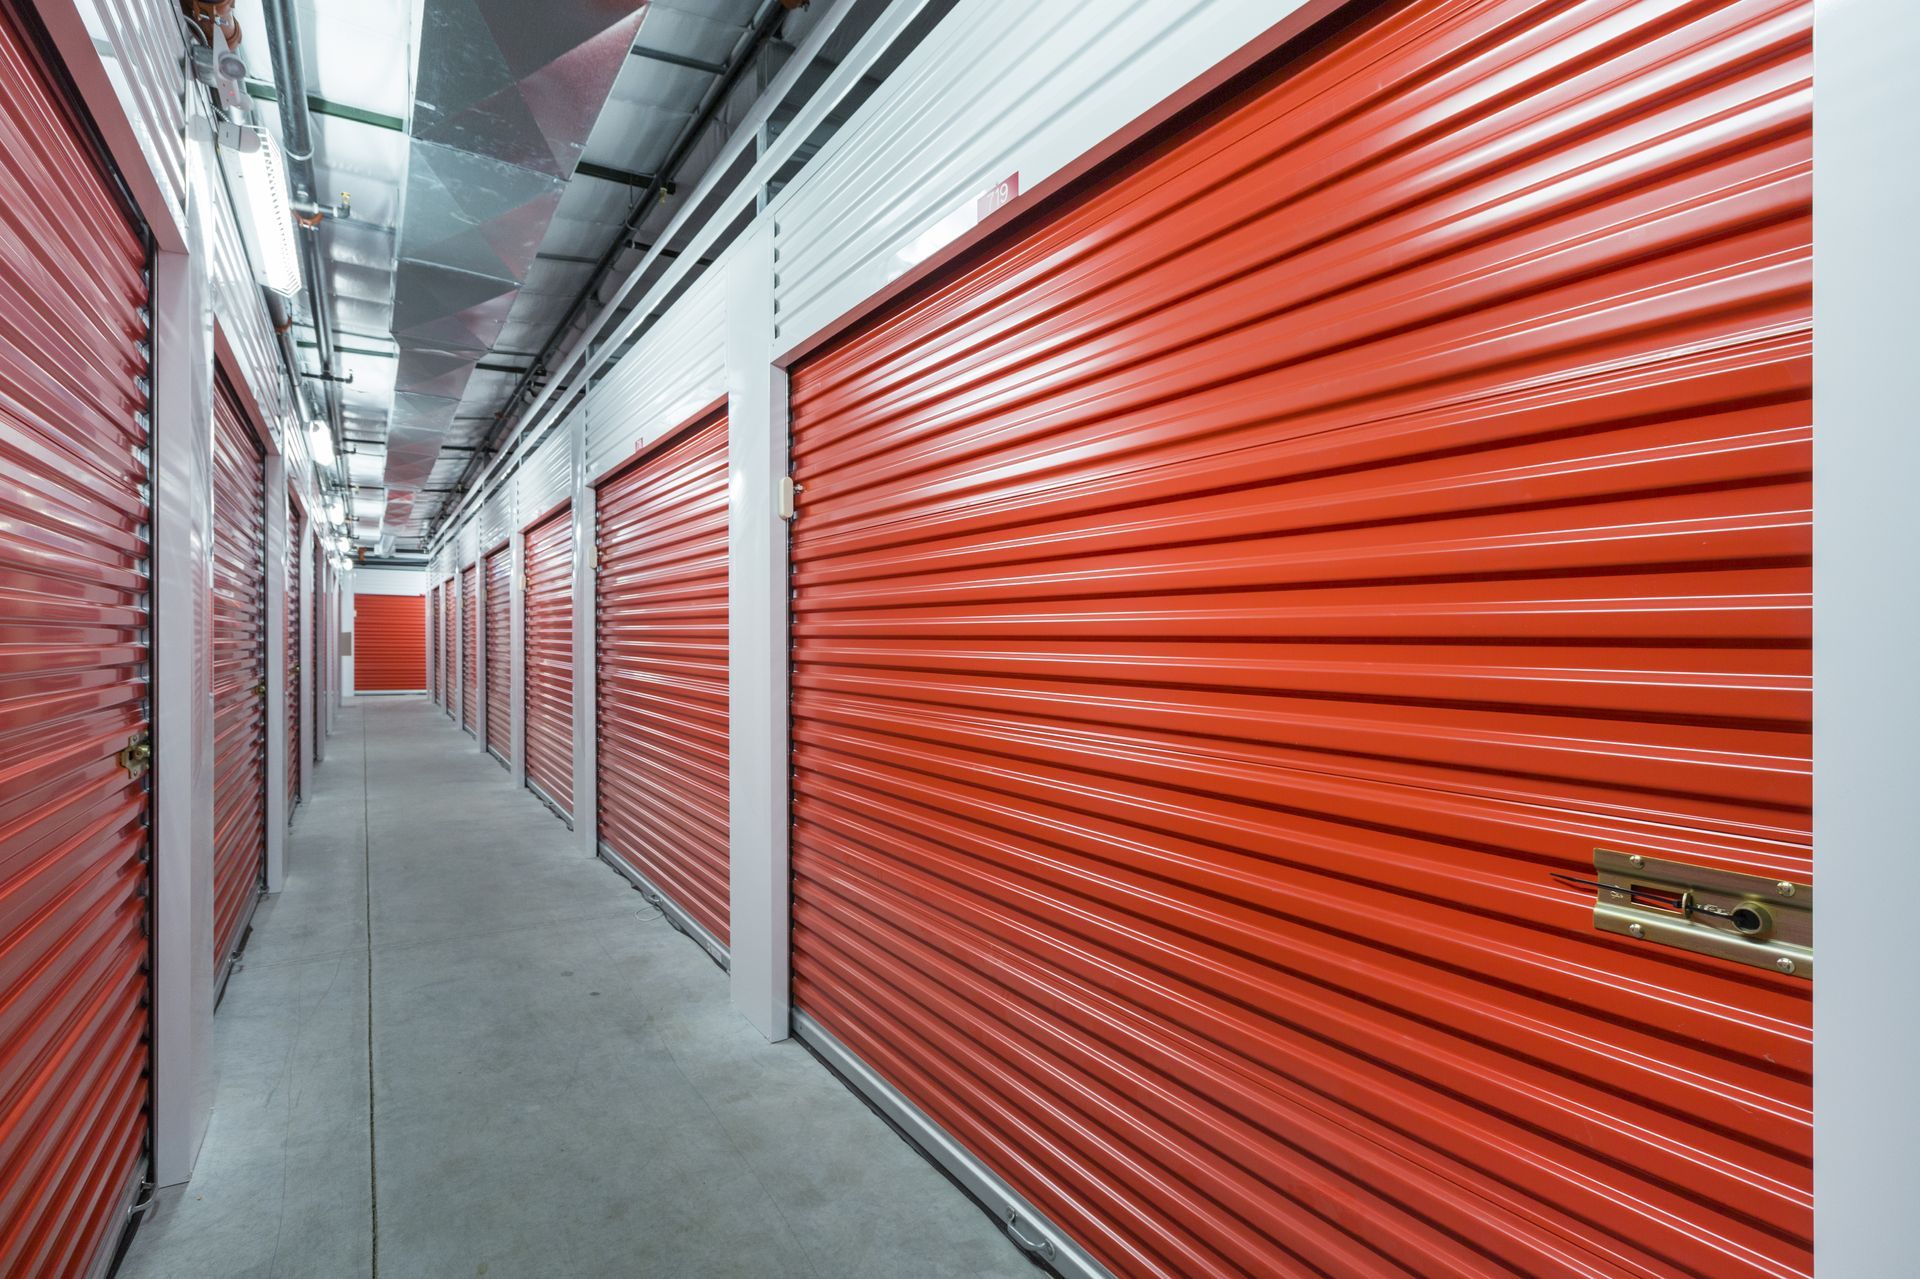 A row of red garage doors in a storage facility.